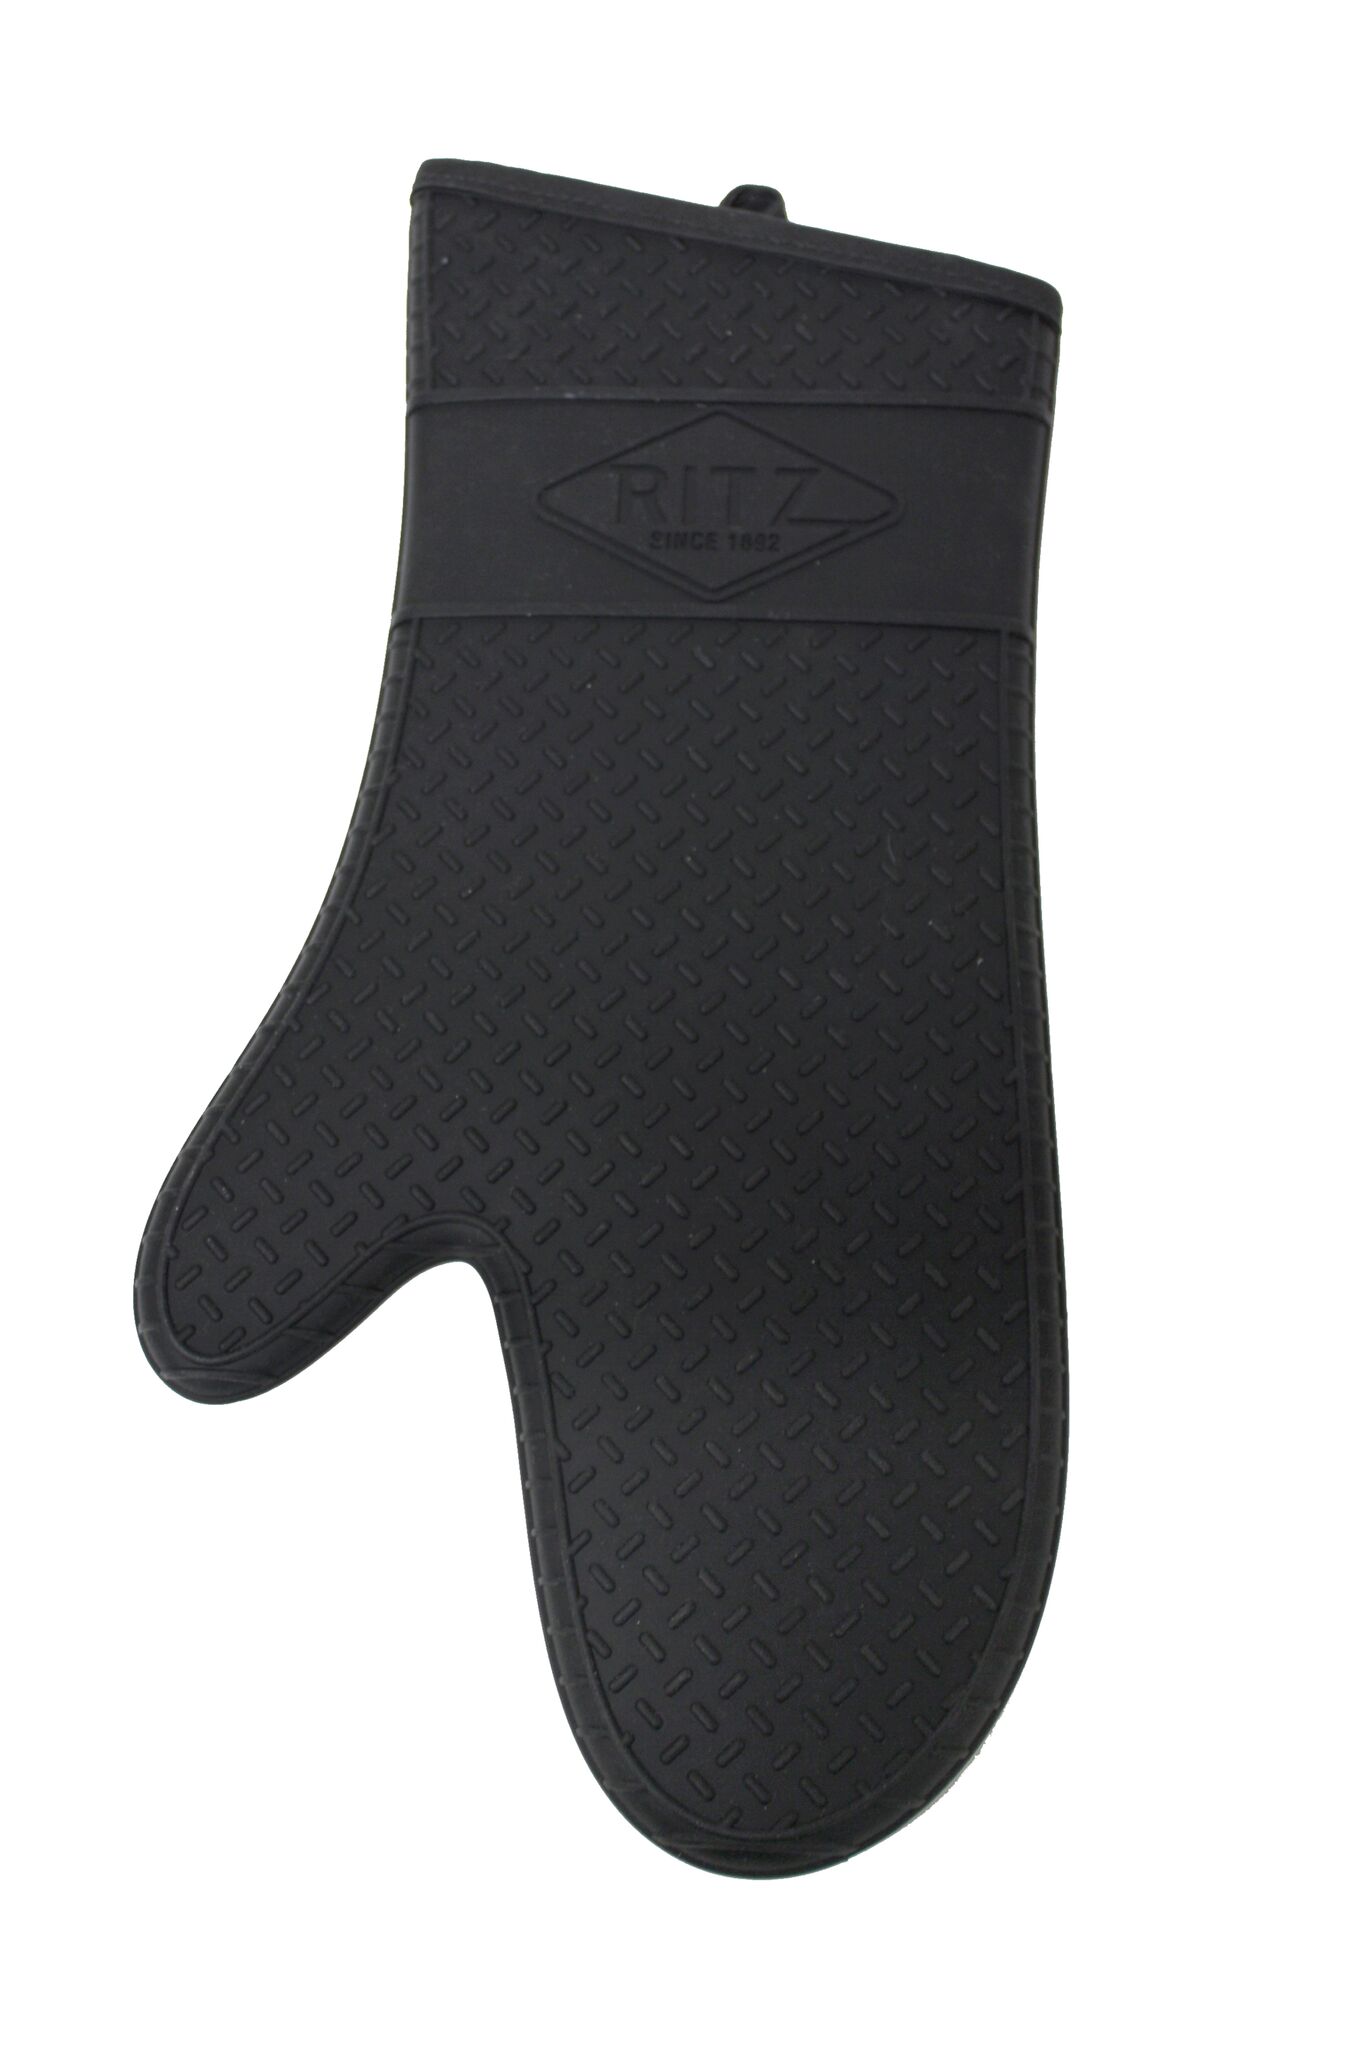 Ritz terry 17 steam-stopping terry oven mitt with silicone lining